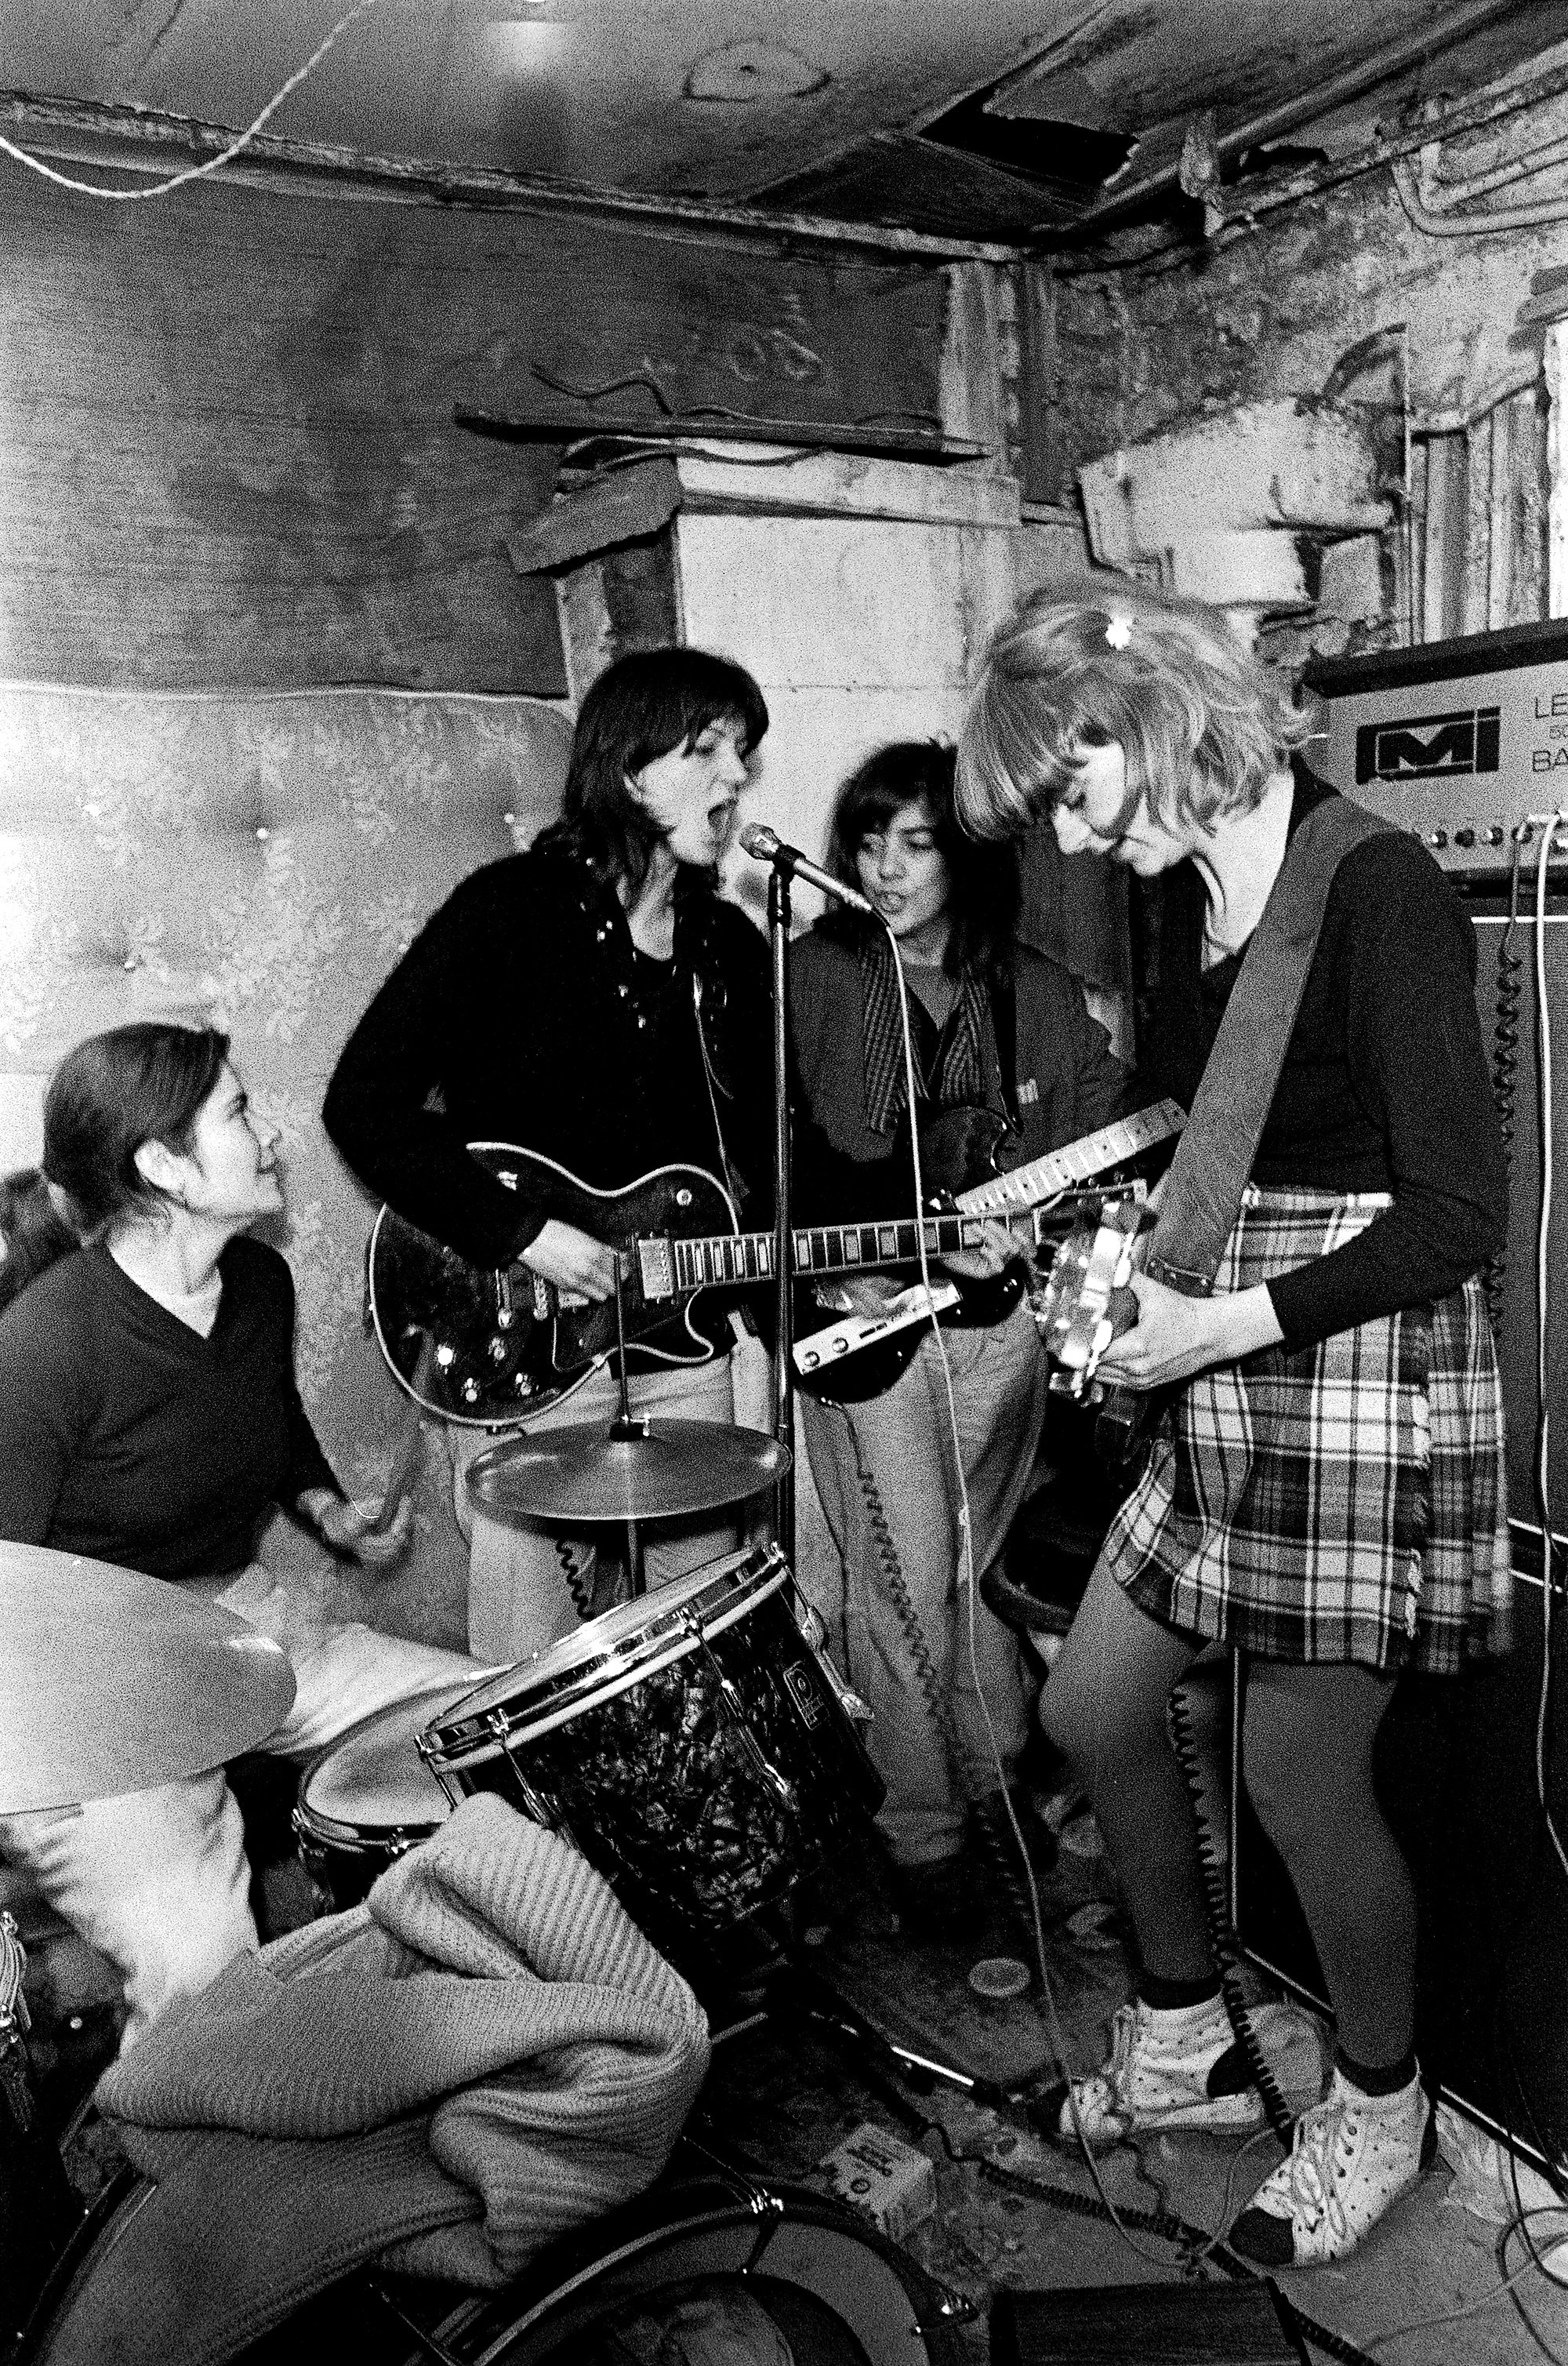 The Raincoats, London, 1979 © Janette Beckman; courtesy of Fahey/Klein Gallery, Los Angeles